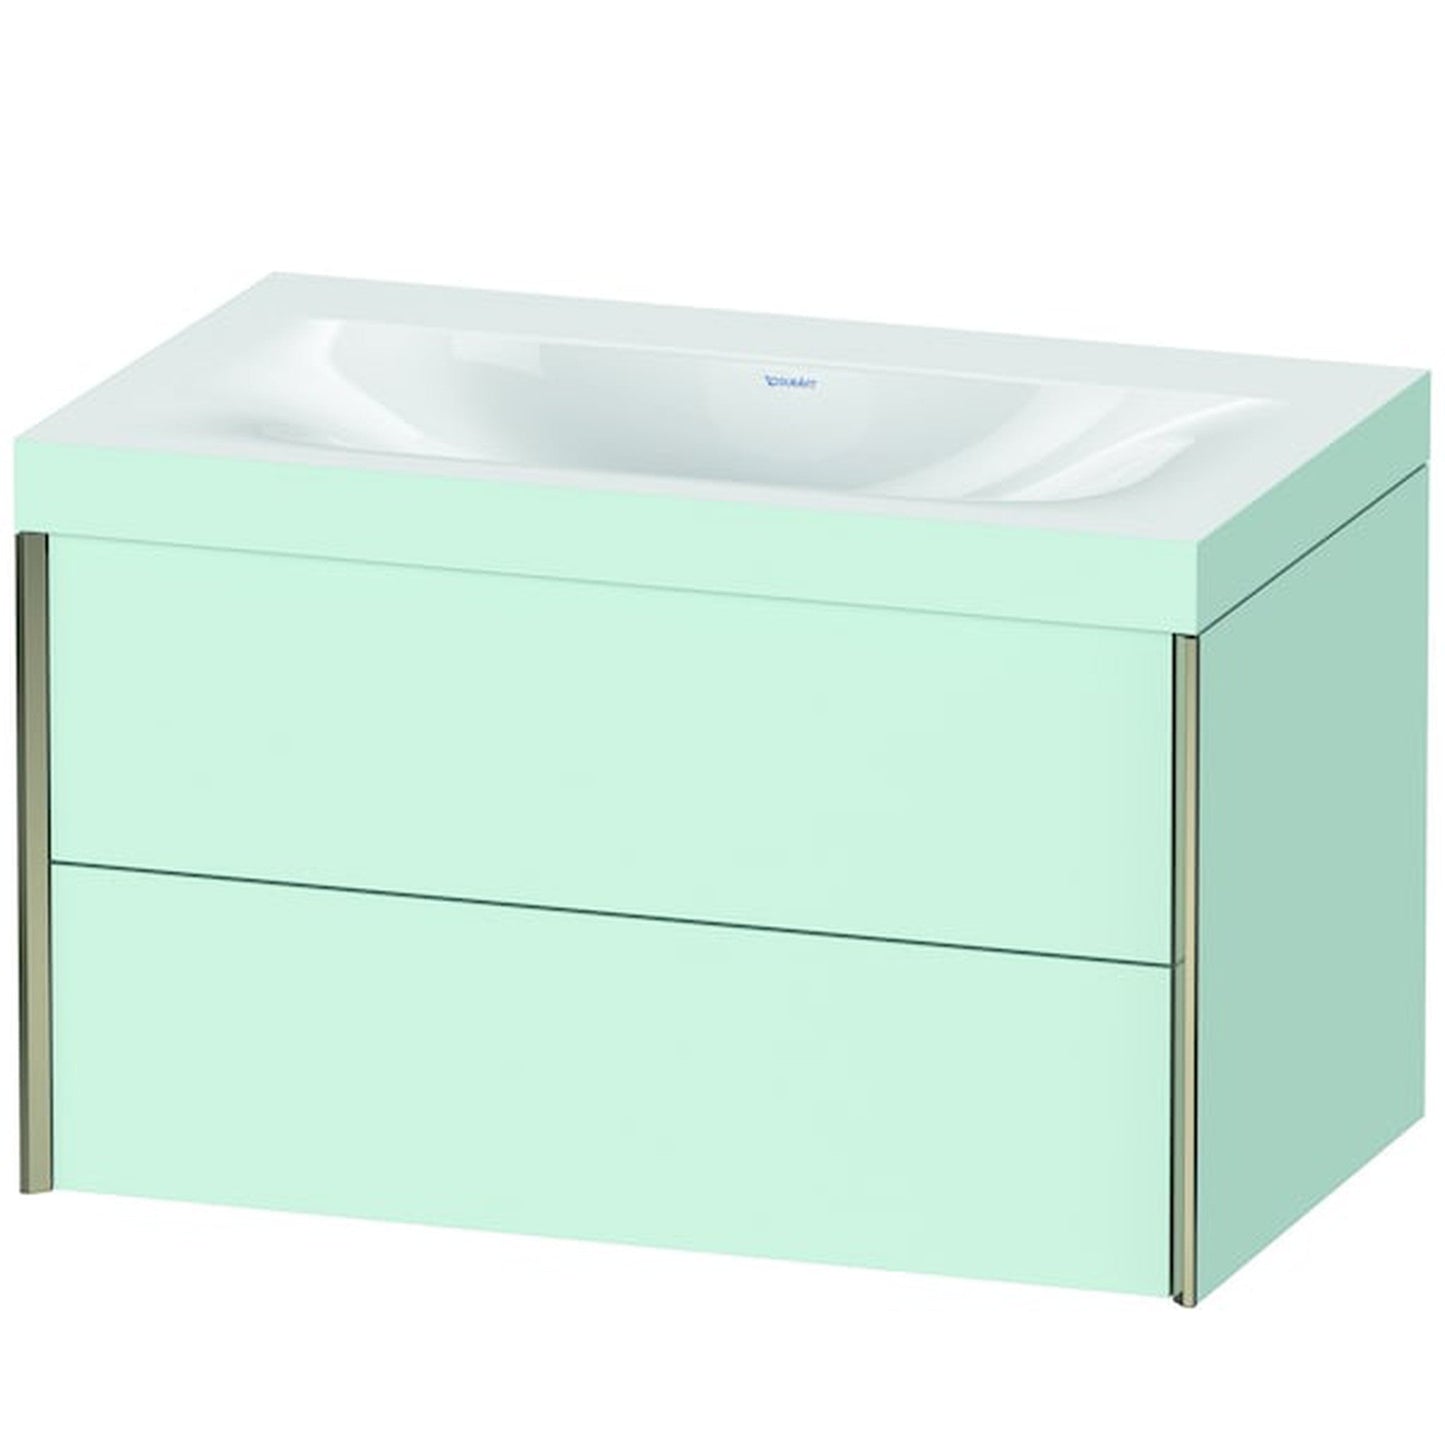 Duravit Xviu 31" x 20" x 19" Two Drawer C-Bonded Wall-Mount Vanity Kit Without Tap Hole, Light Blue (XV4615NB109C)